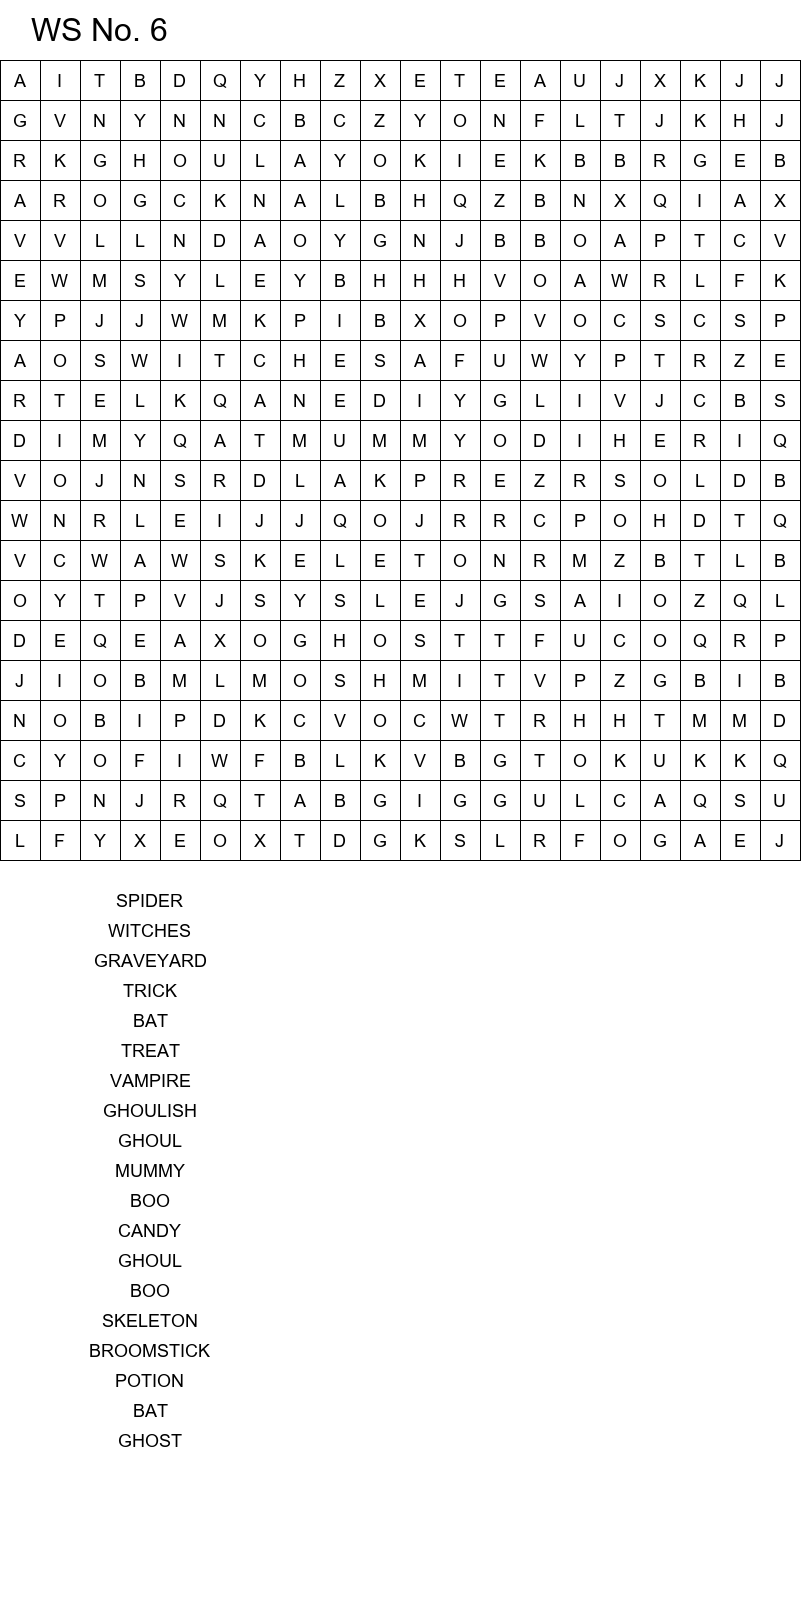 Free online Halloween word search puzzles size 20x20 No 6